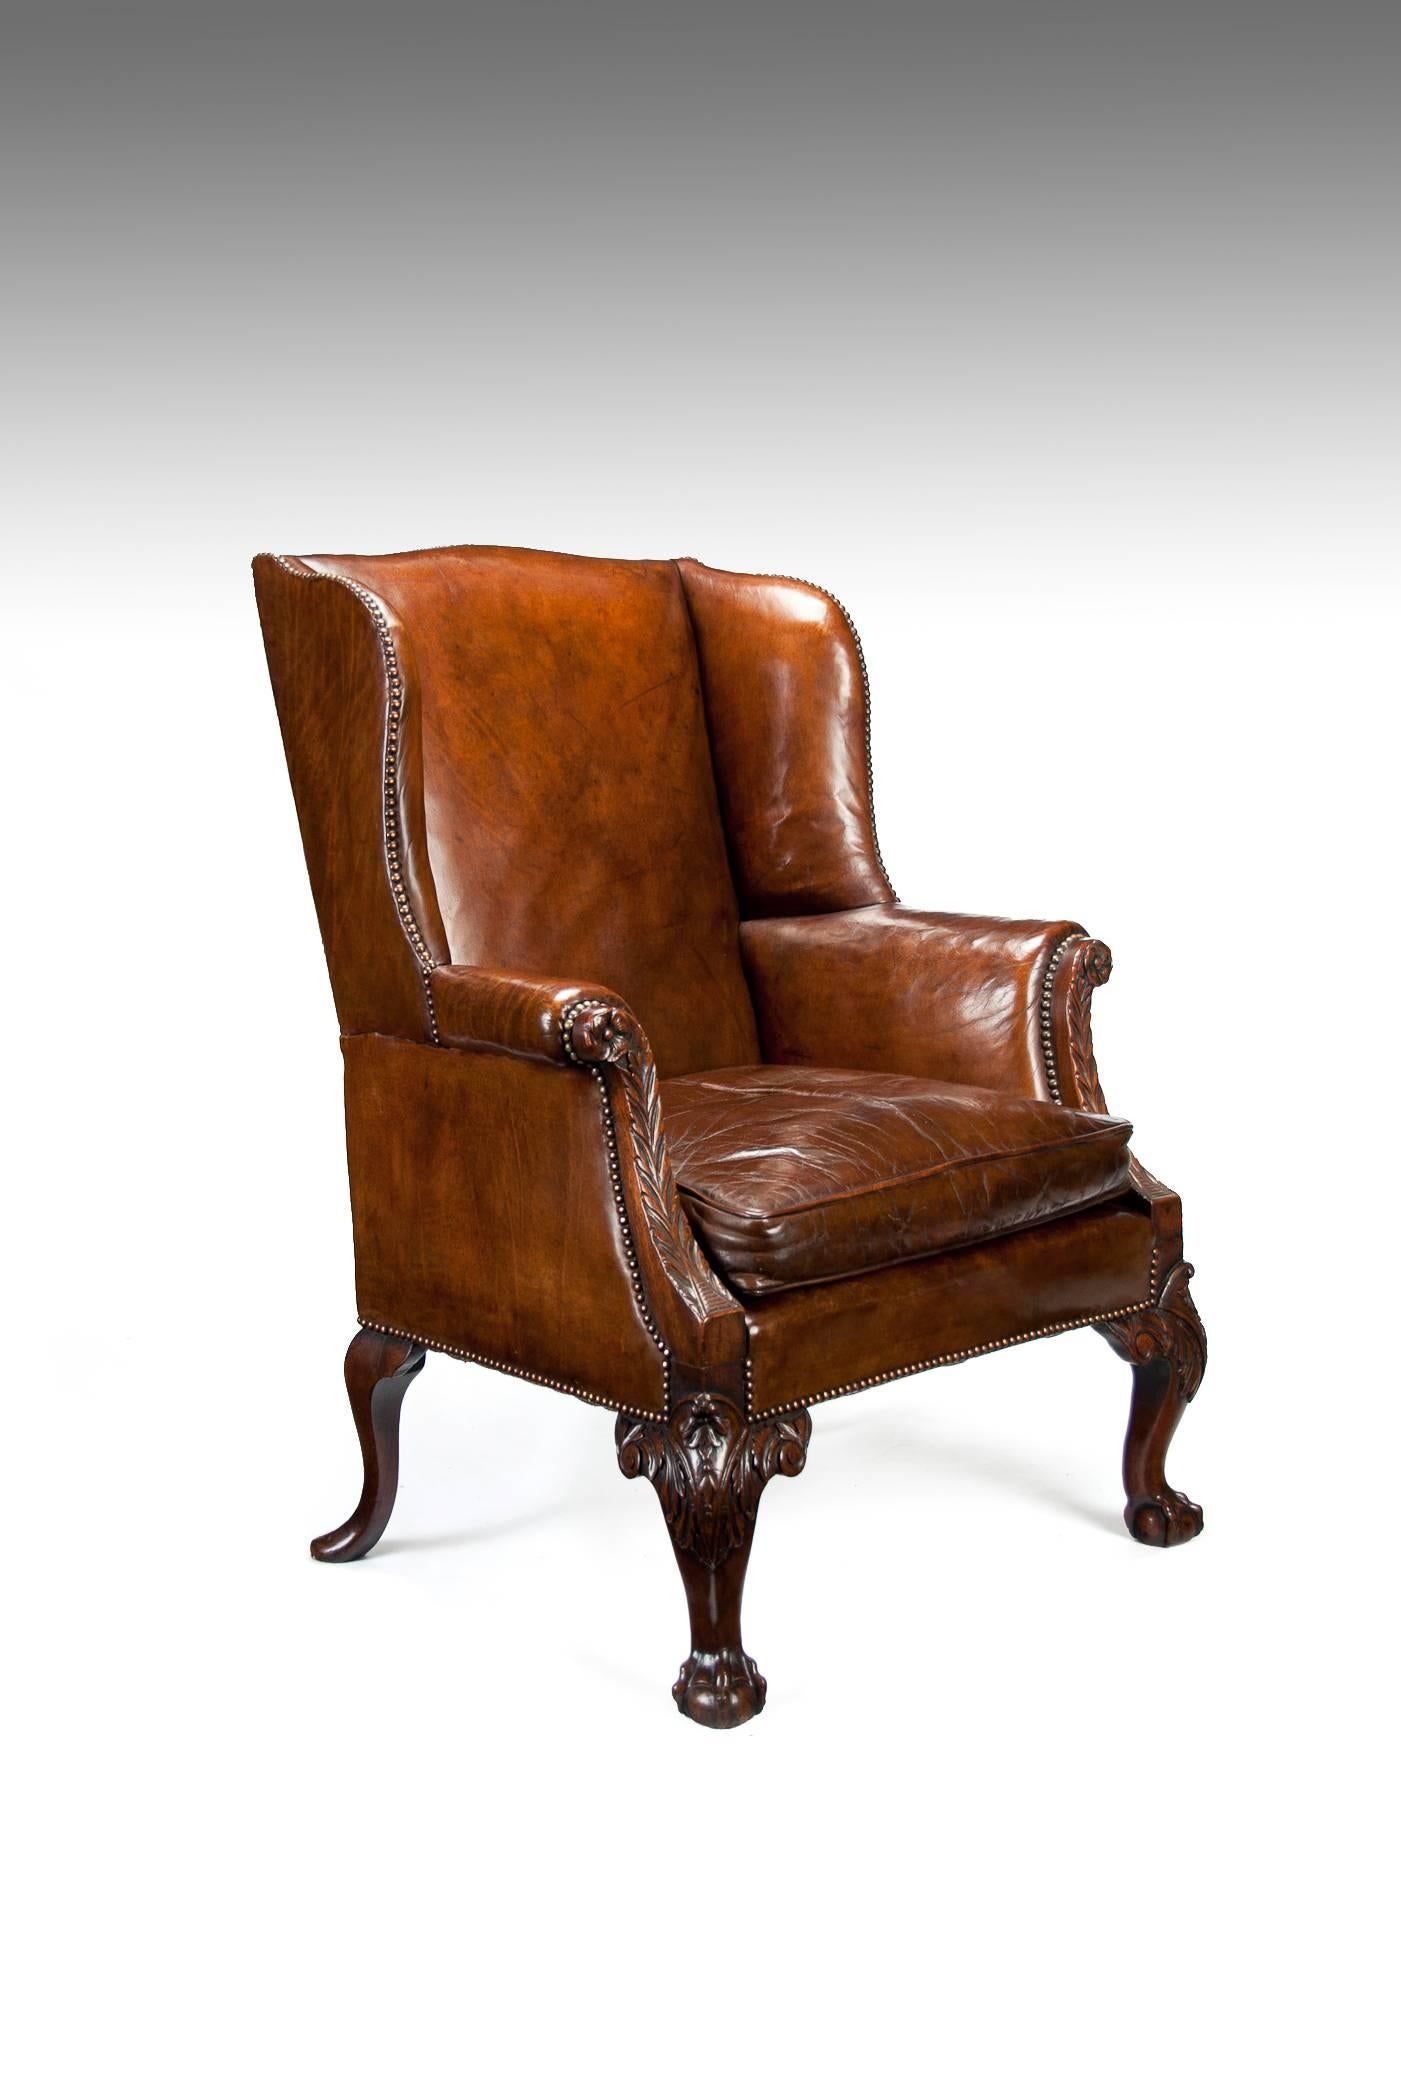 A fine and rare mid-19th century mahogany leather upholstered wing-backed armchair / Gainsborough chair circa 1850.

This extremely well-drawn chair has superb proportions with a good wide seat. 
Retaining a beautiful old leather, the slightly domed